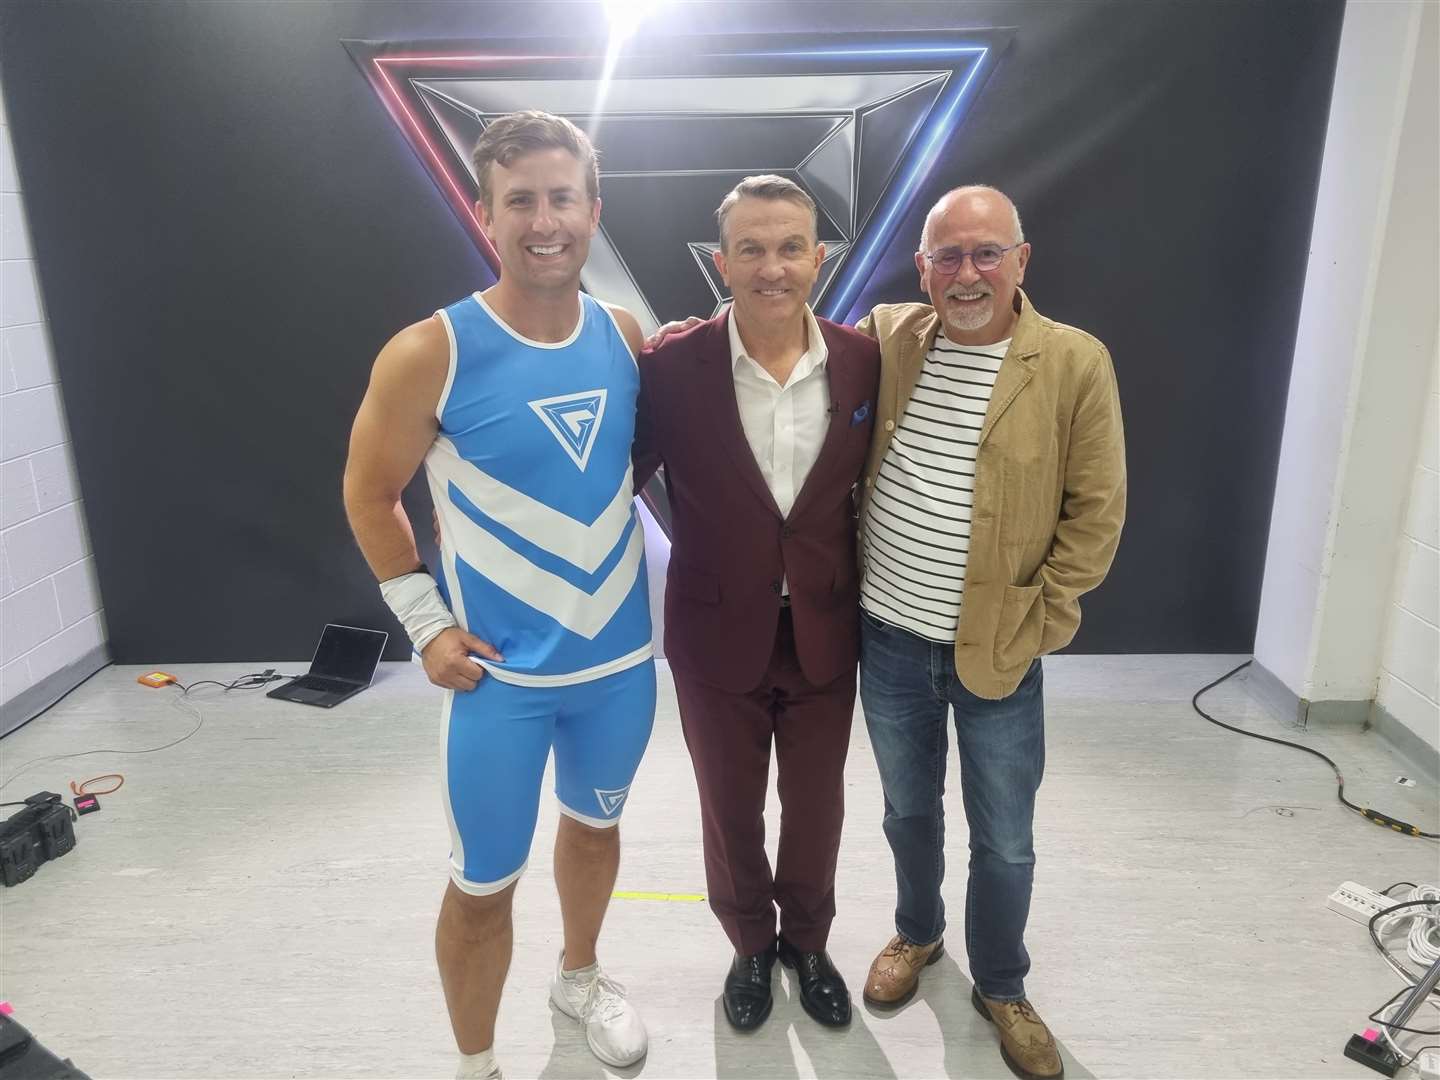 Finlay, Gladiators presenter Bradley Walsh and Evan pose for a photo